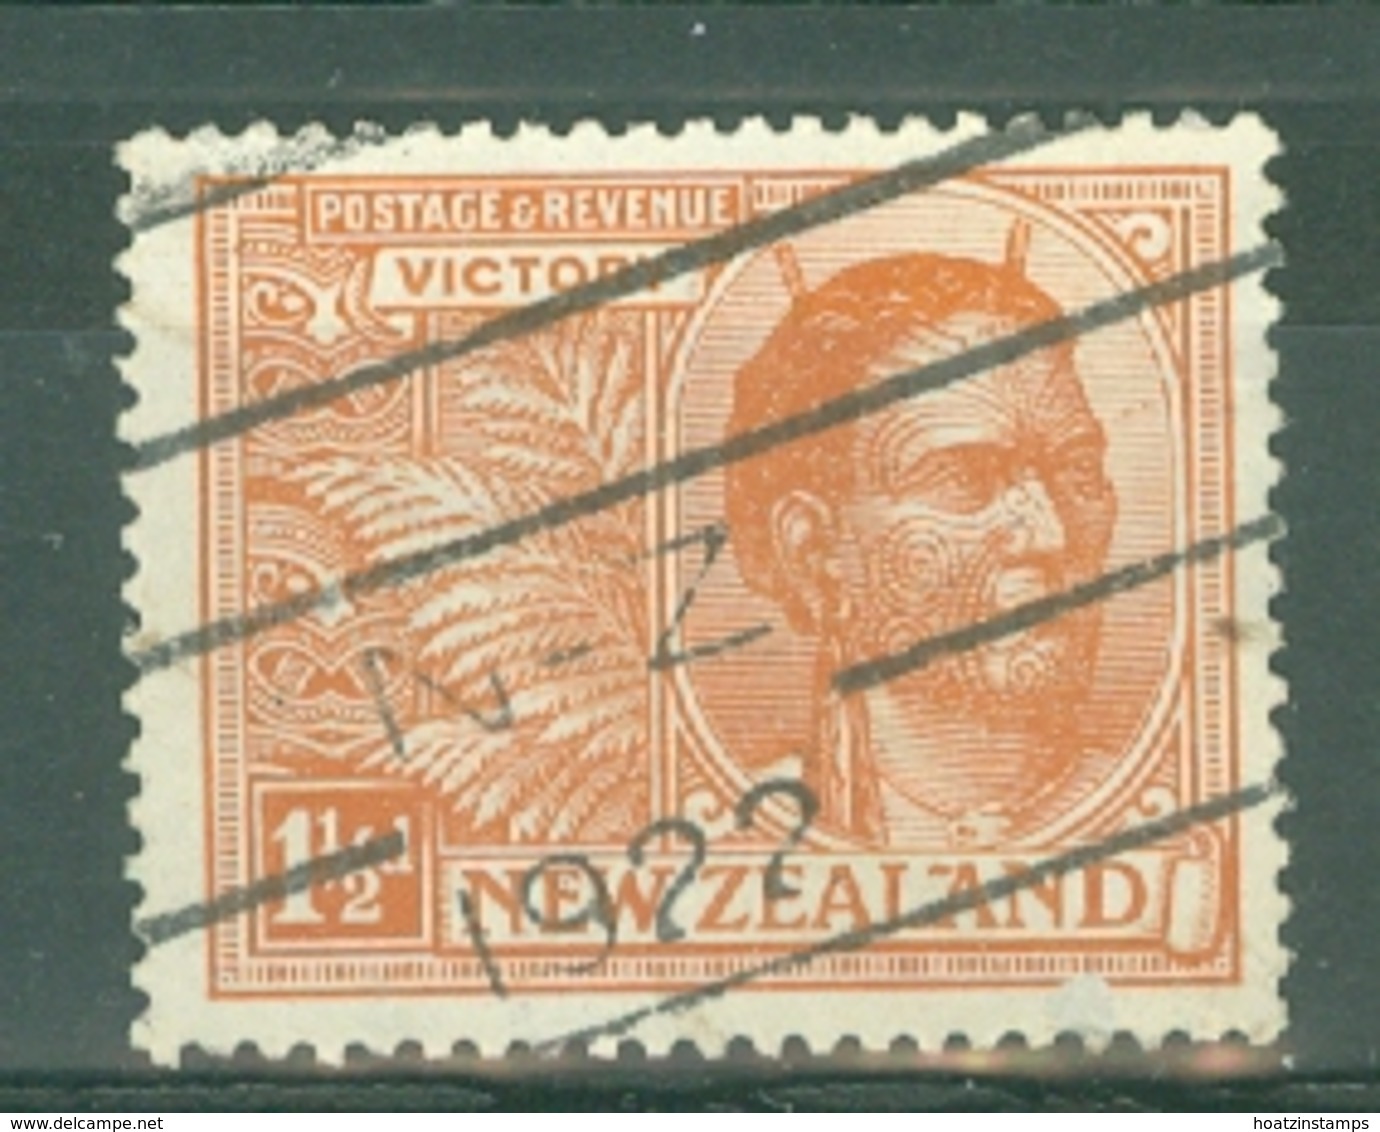 New Zealand: 1920   Victory     SG455     1½d    Used - Gebraucht